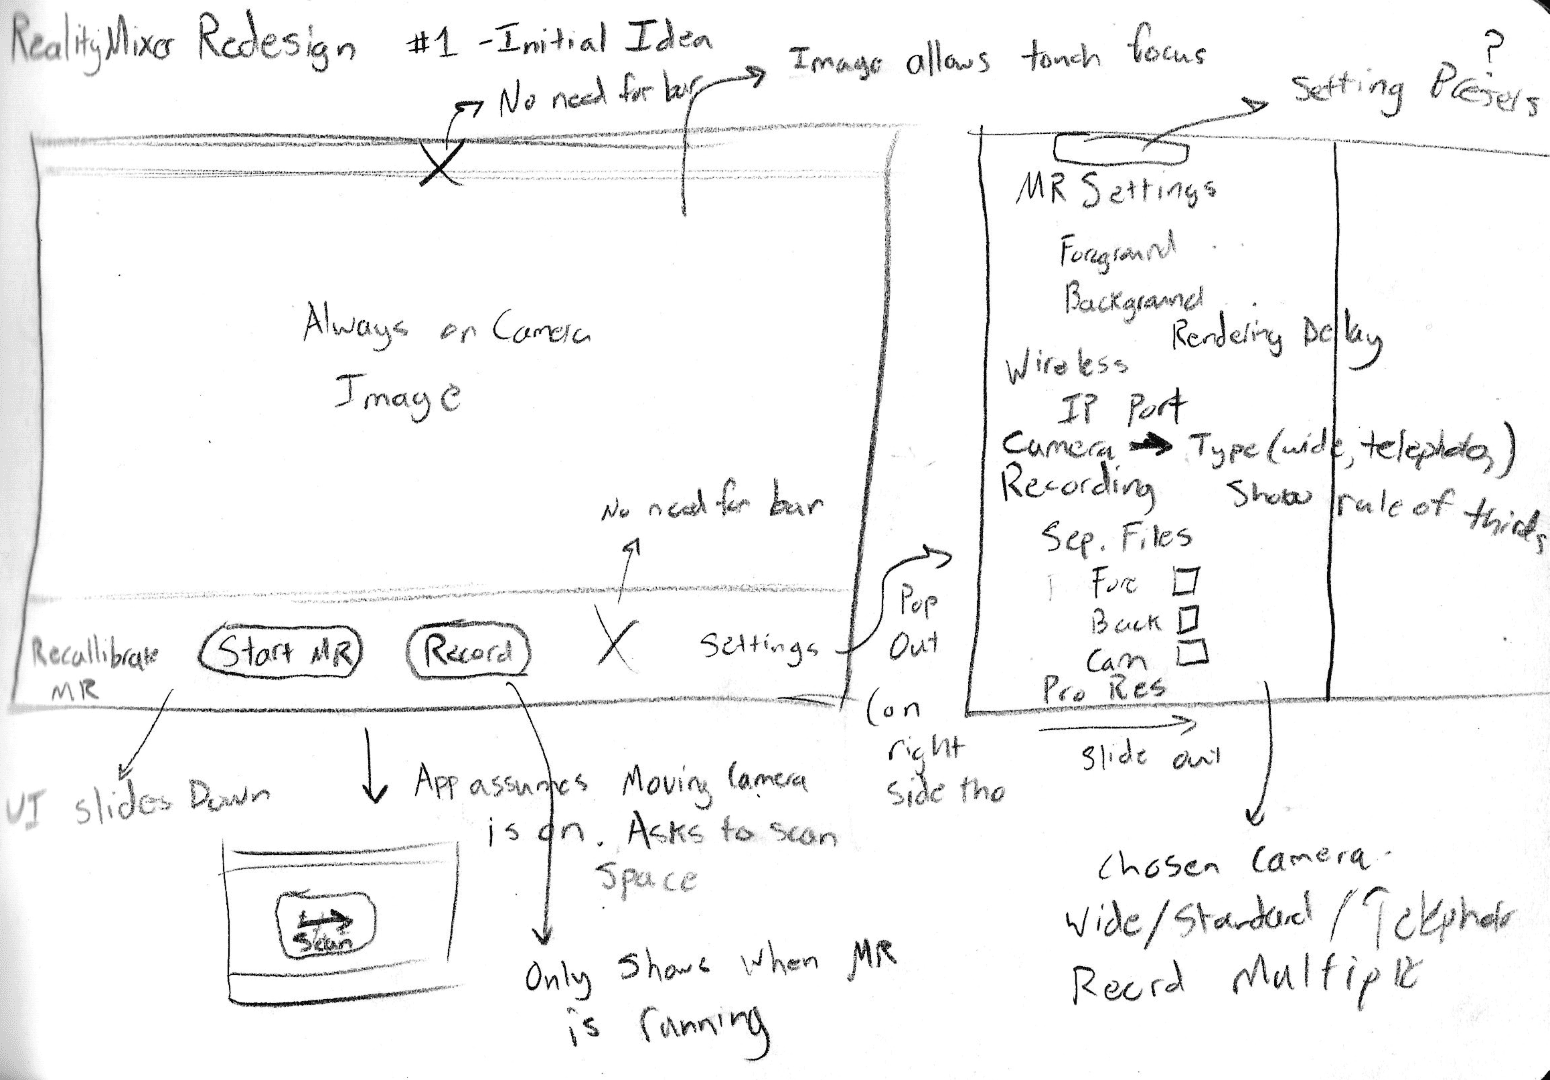 A hand-drawn sketch showing a UI design of the AR app with only a few key buttons to transition between calibration and recording states and a panel that pops out from the side of the UI to reveal settings.